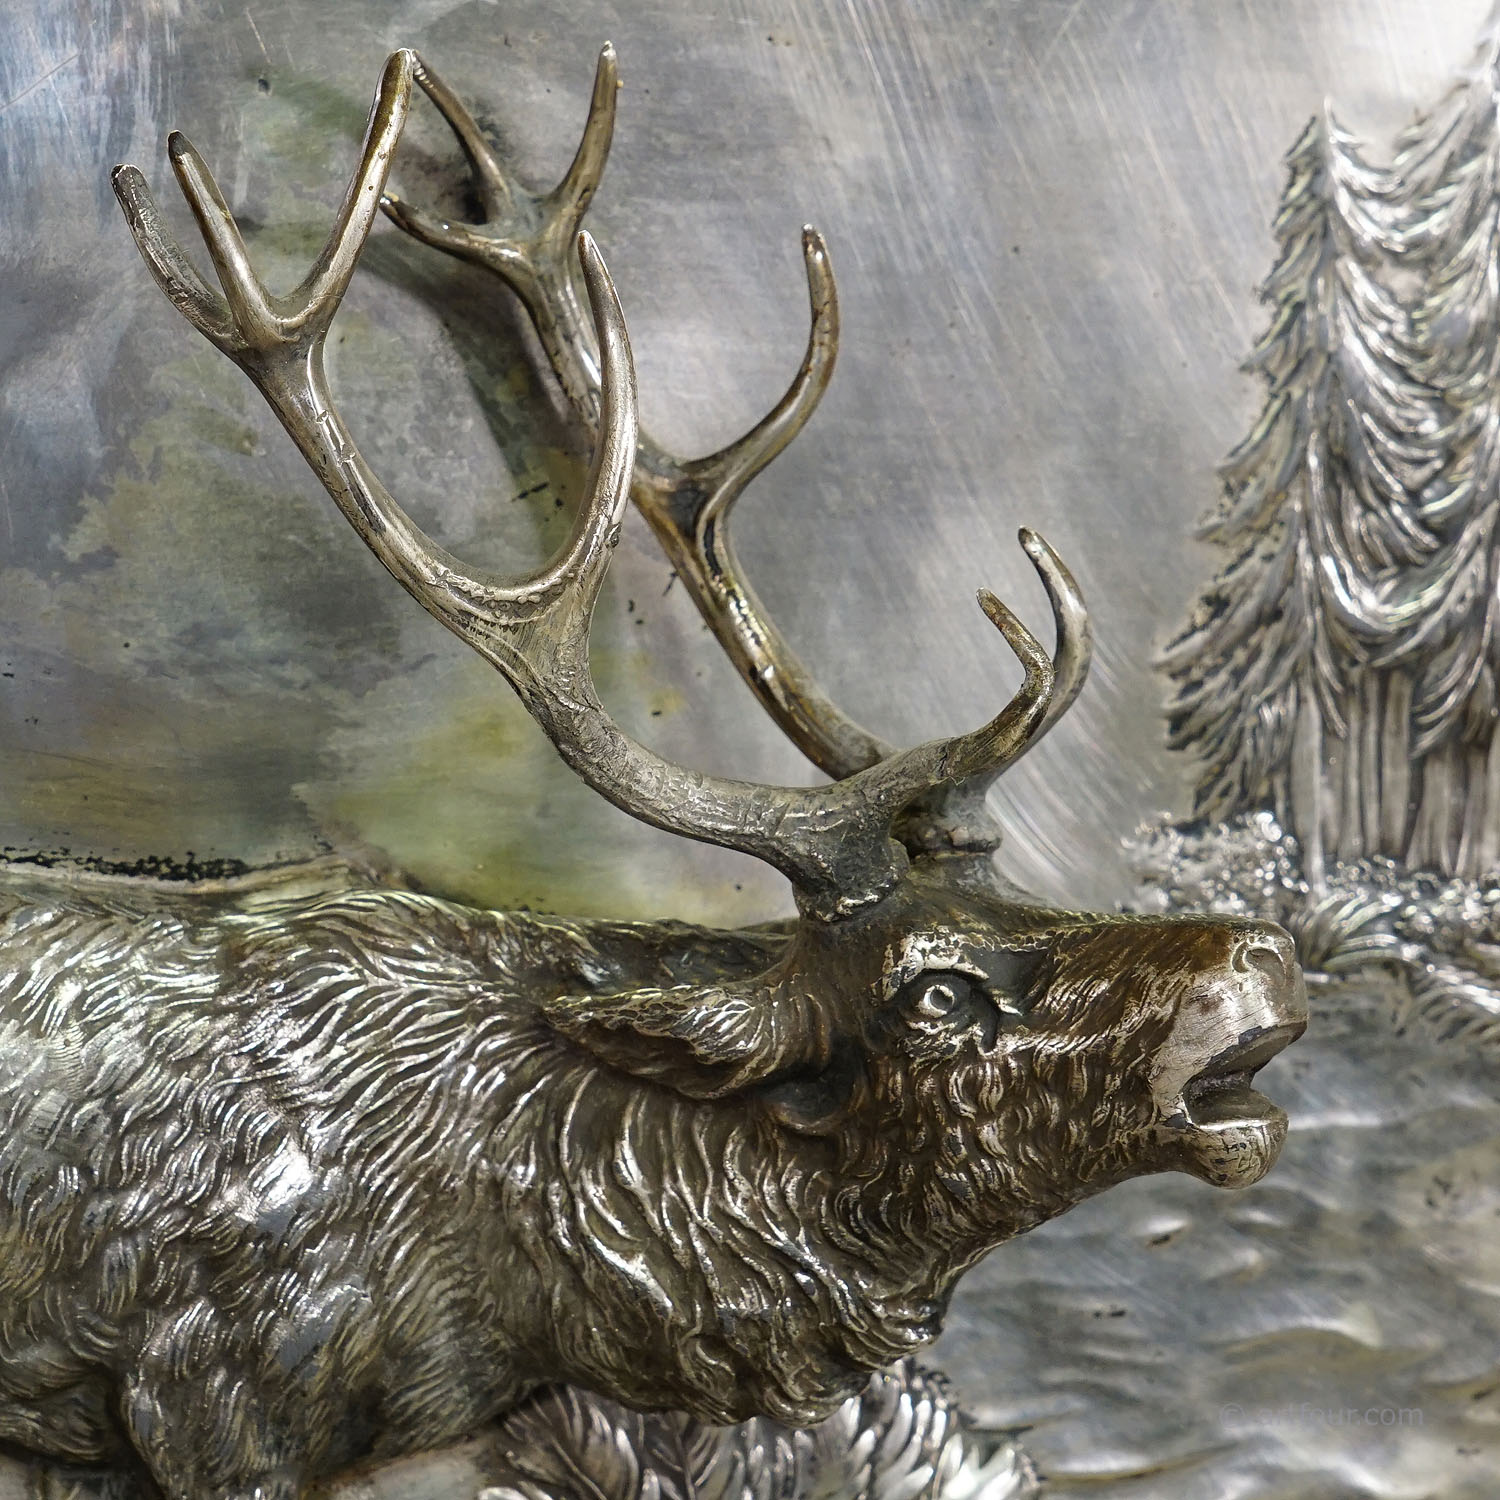 Antique Silvered Metal Relief Featuring a Stag and a Doe